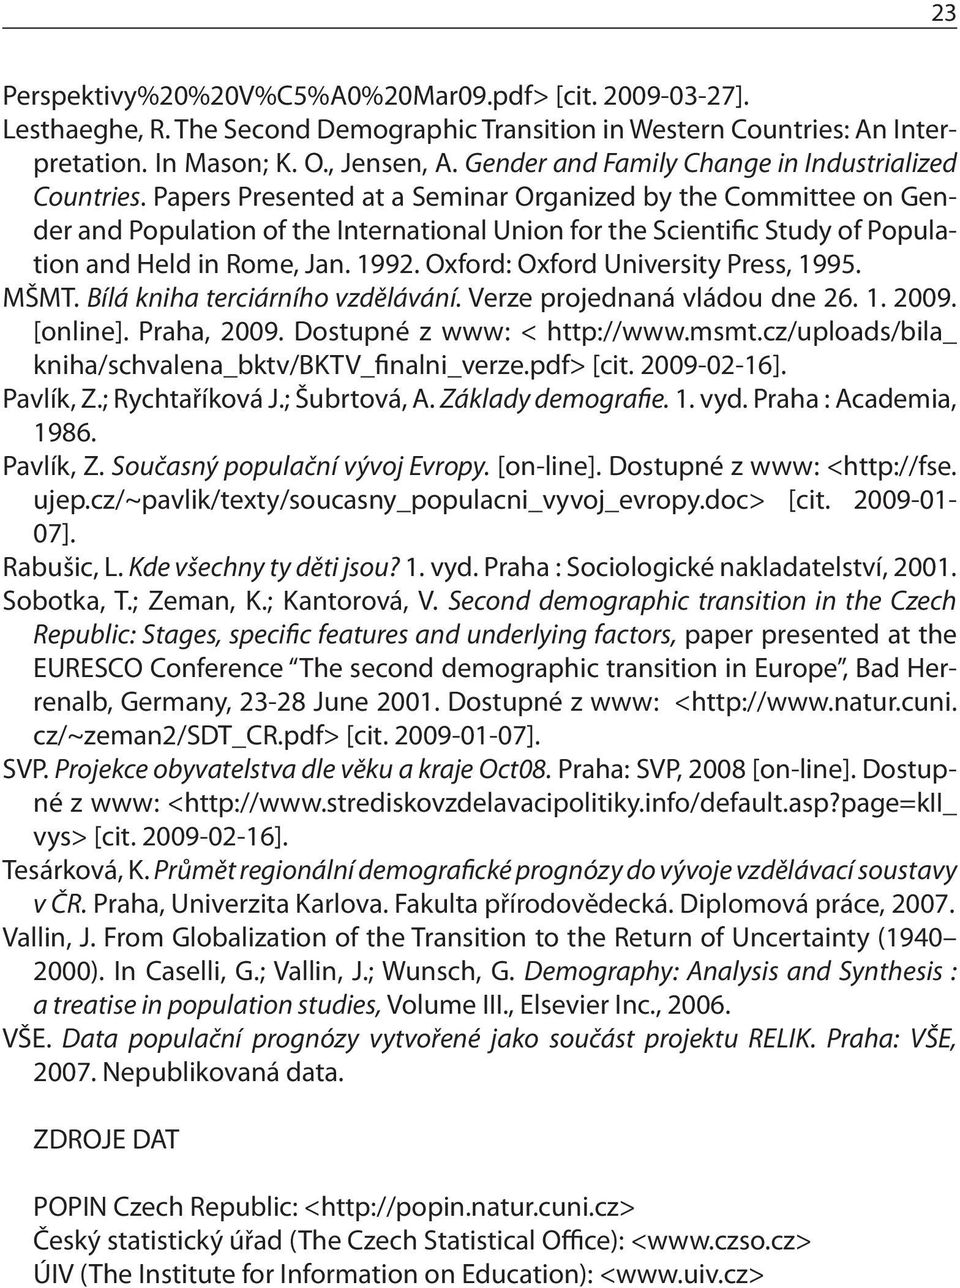 Papers Presented at a Seminar Organized by the Committee on Gender and Population of the International Union for the Scientific Study of Population and Held in Rome, Jan. 1992.